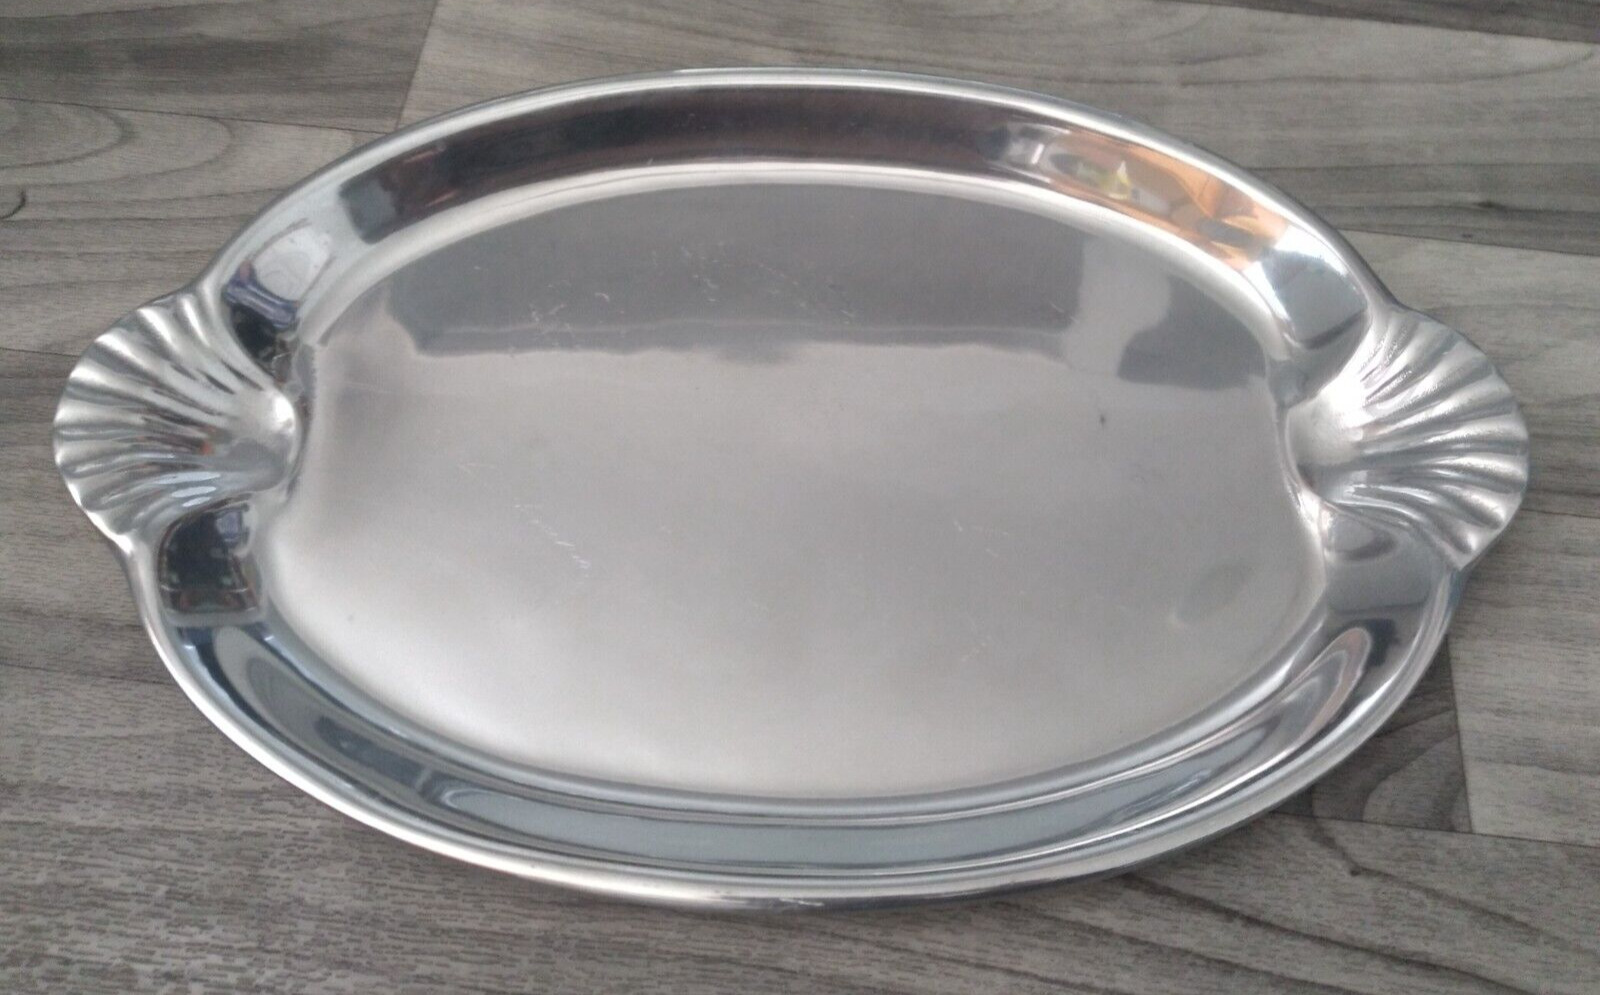 Wilton Pewter Serving Platter Tray 356234 Scallop SeaShell Handle